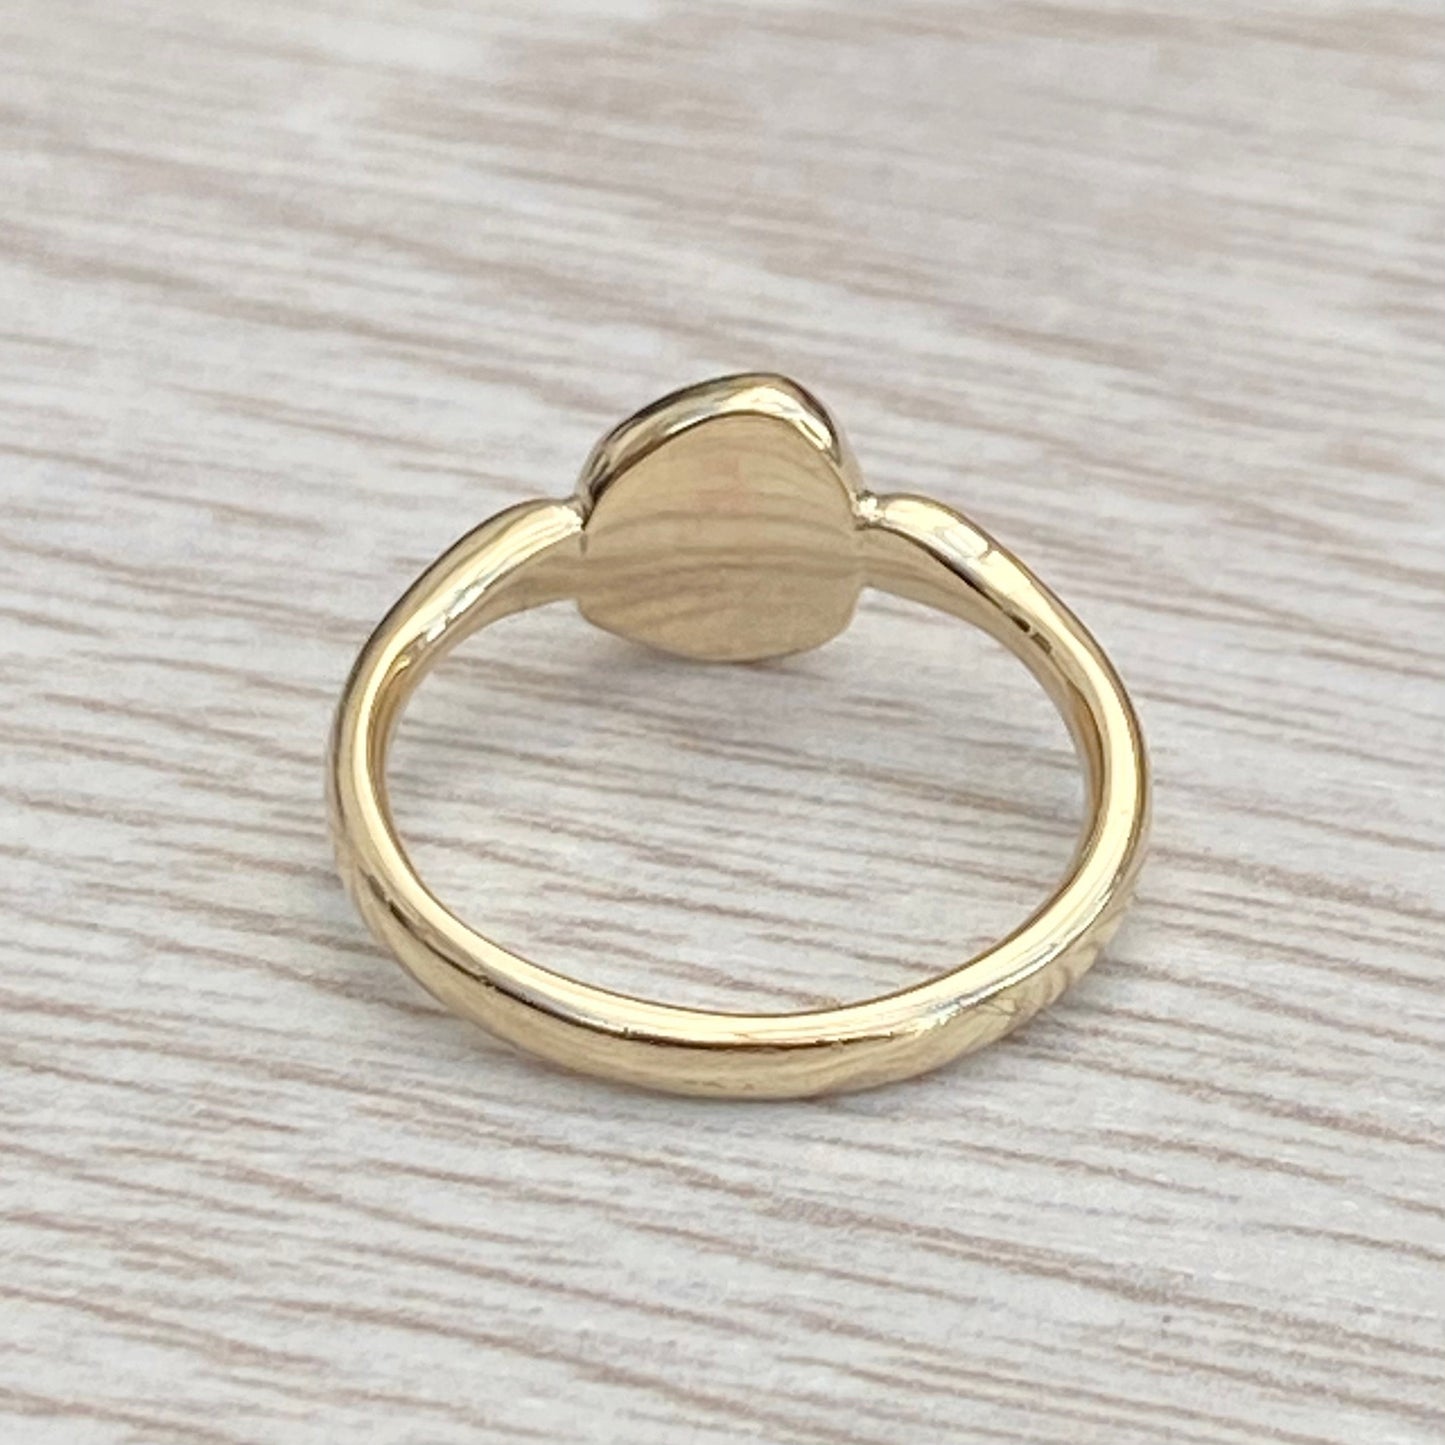 Handmade 9ct yellow gold pebble signet ring - recycled old gold - unique design - UK size K 1/2 - US size 5 1/2 - Can be hand engraved